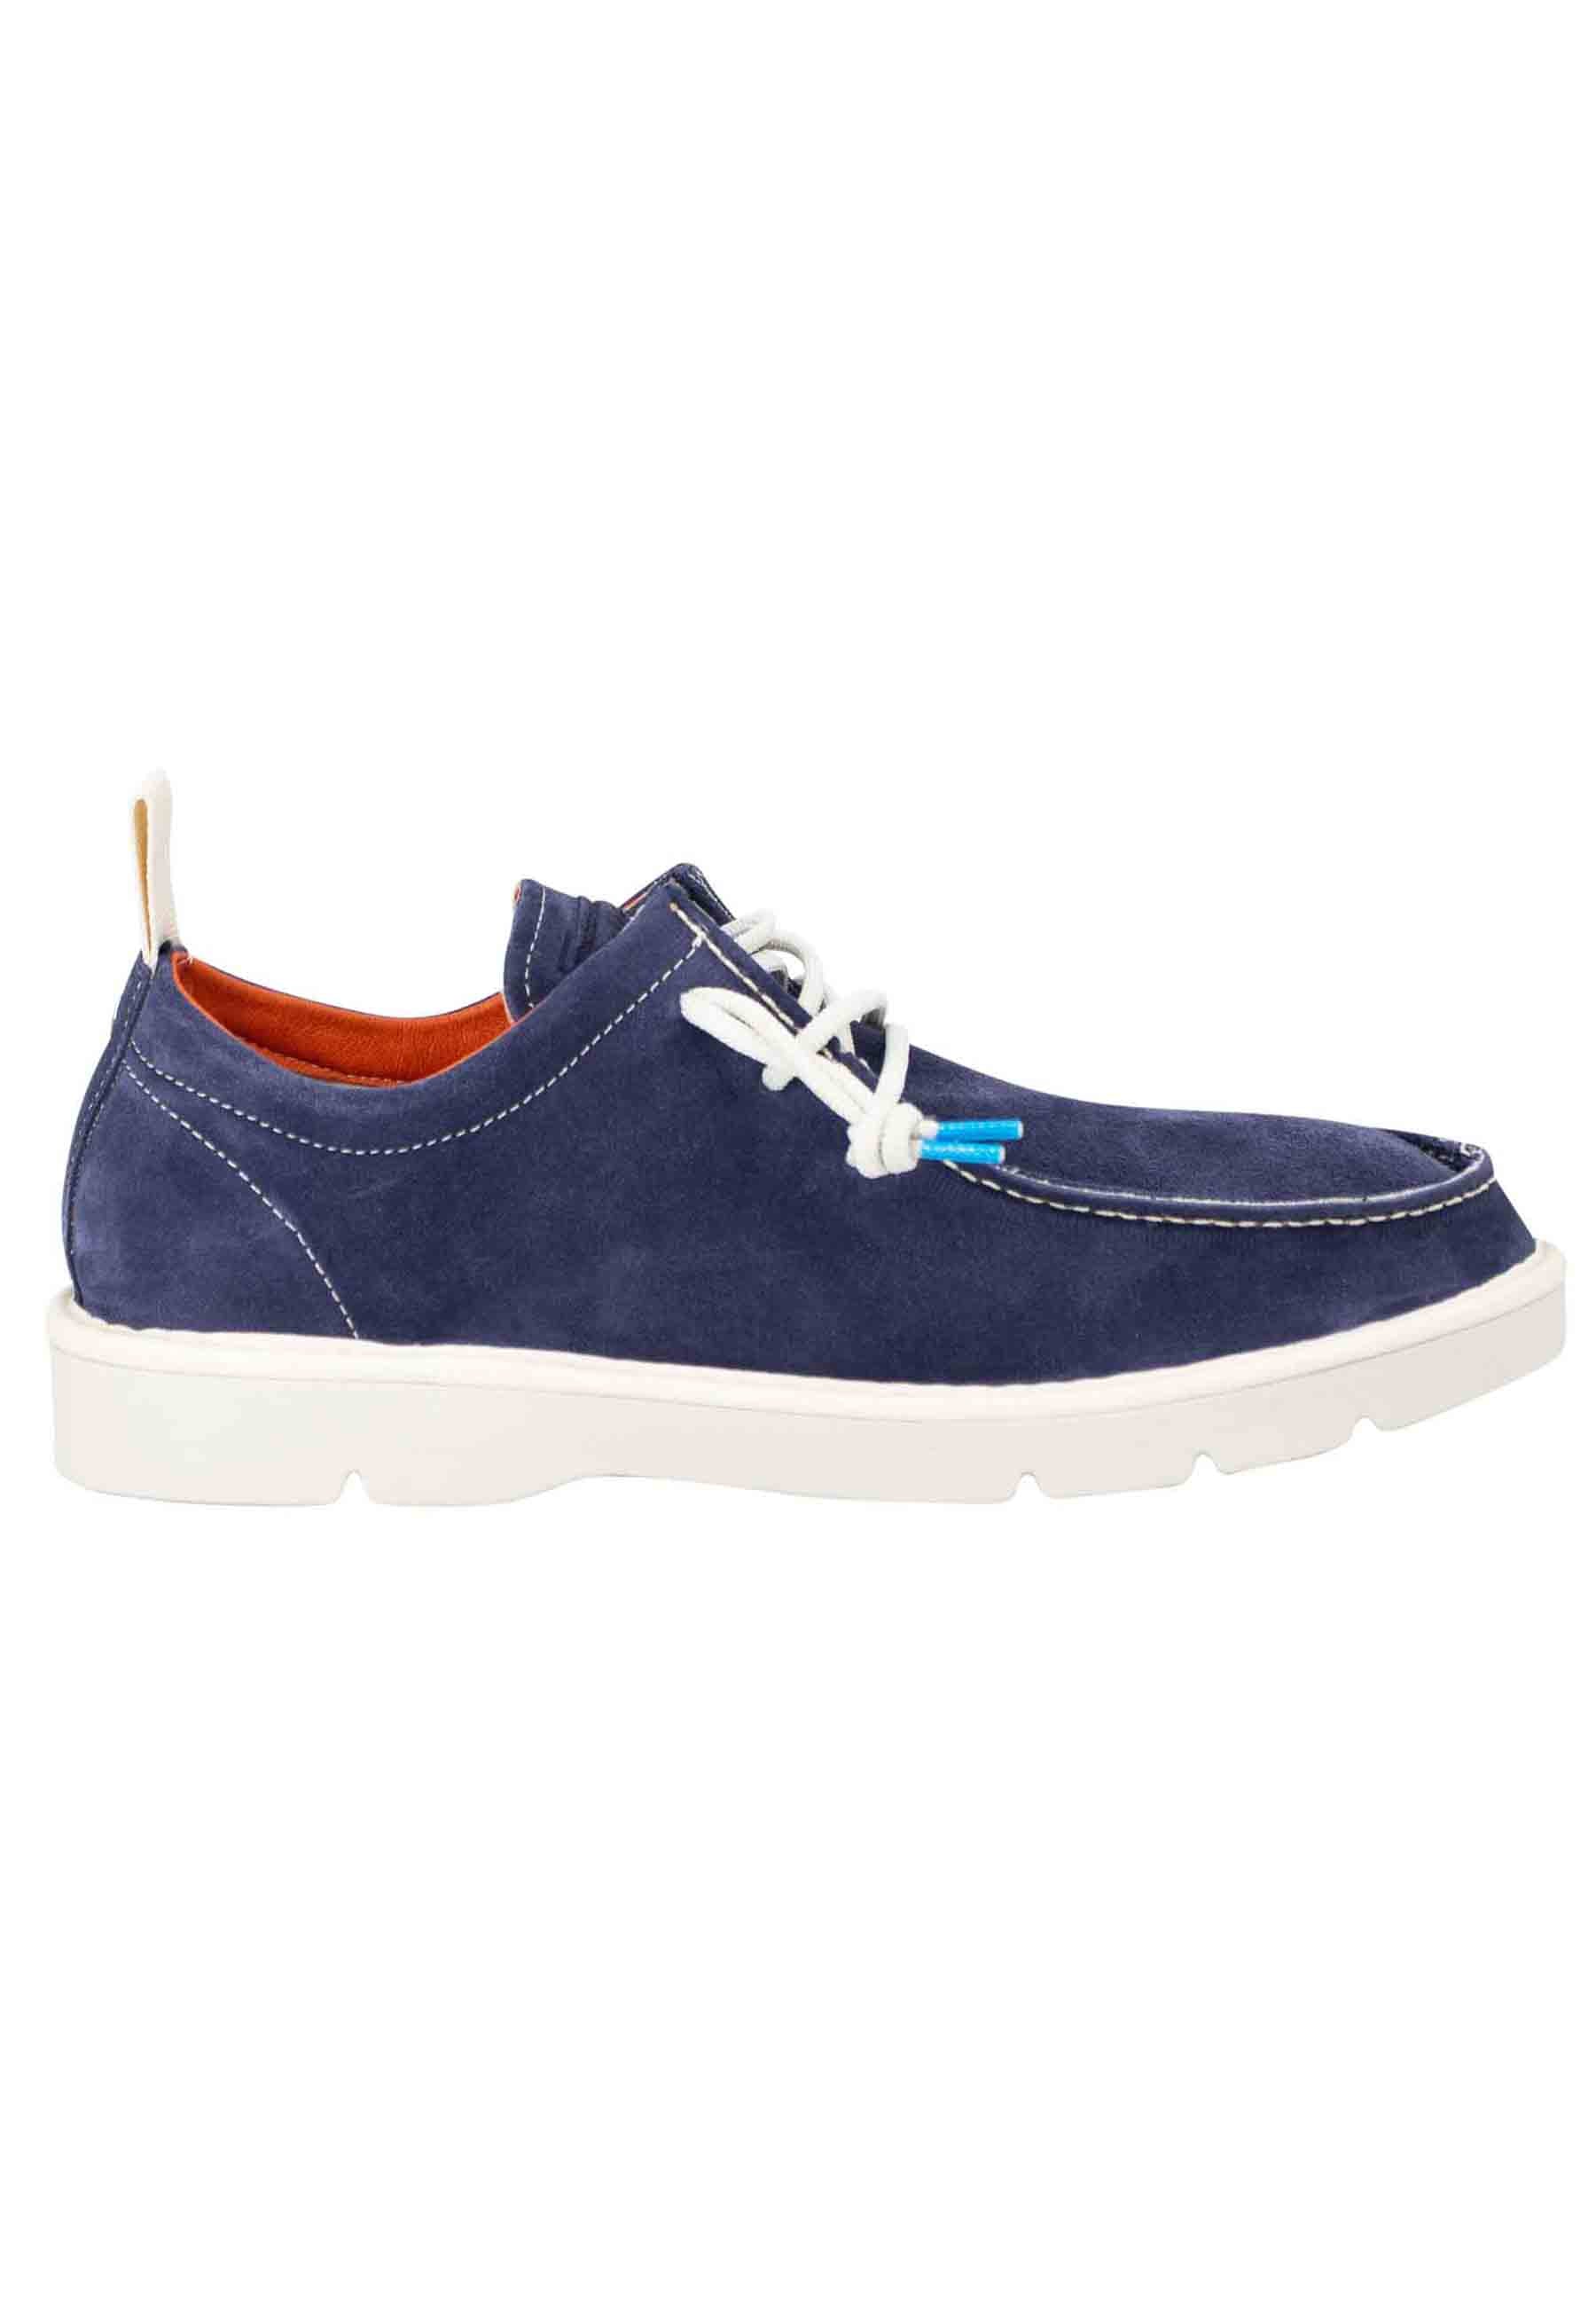 Wally men's lace-ups in blue suede 0002T008